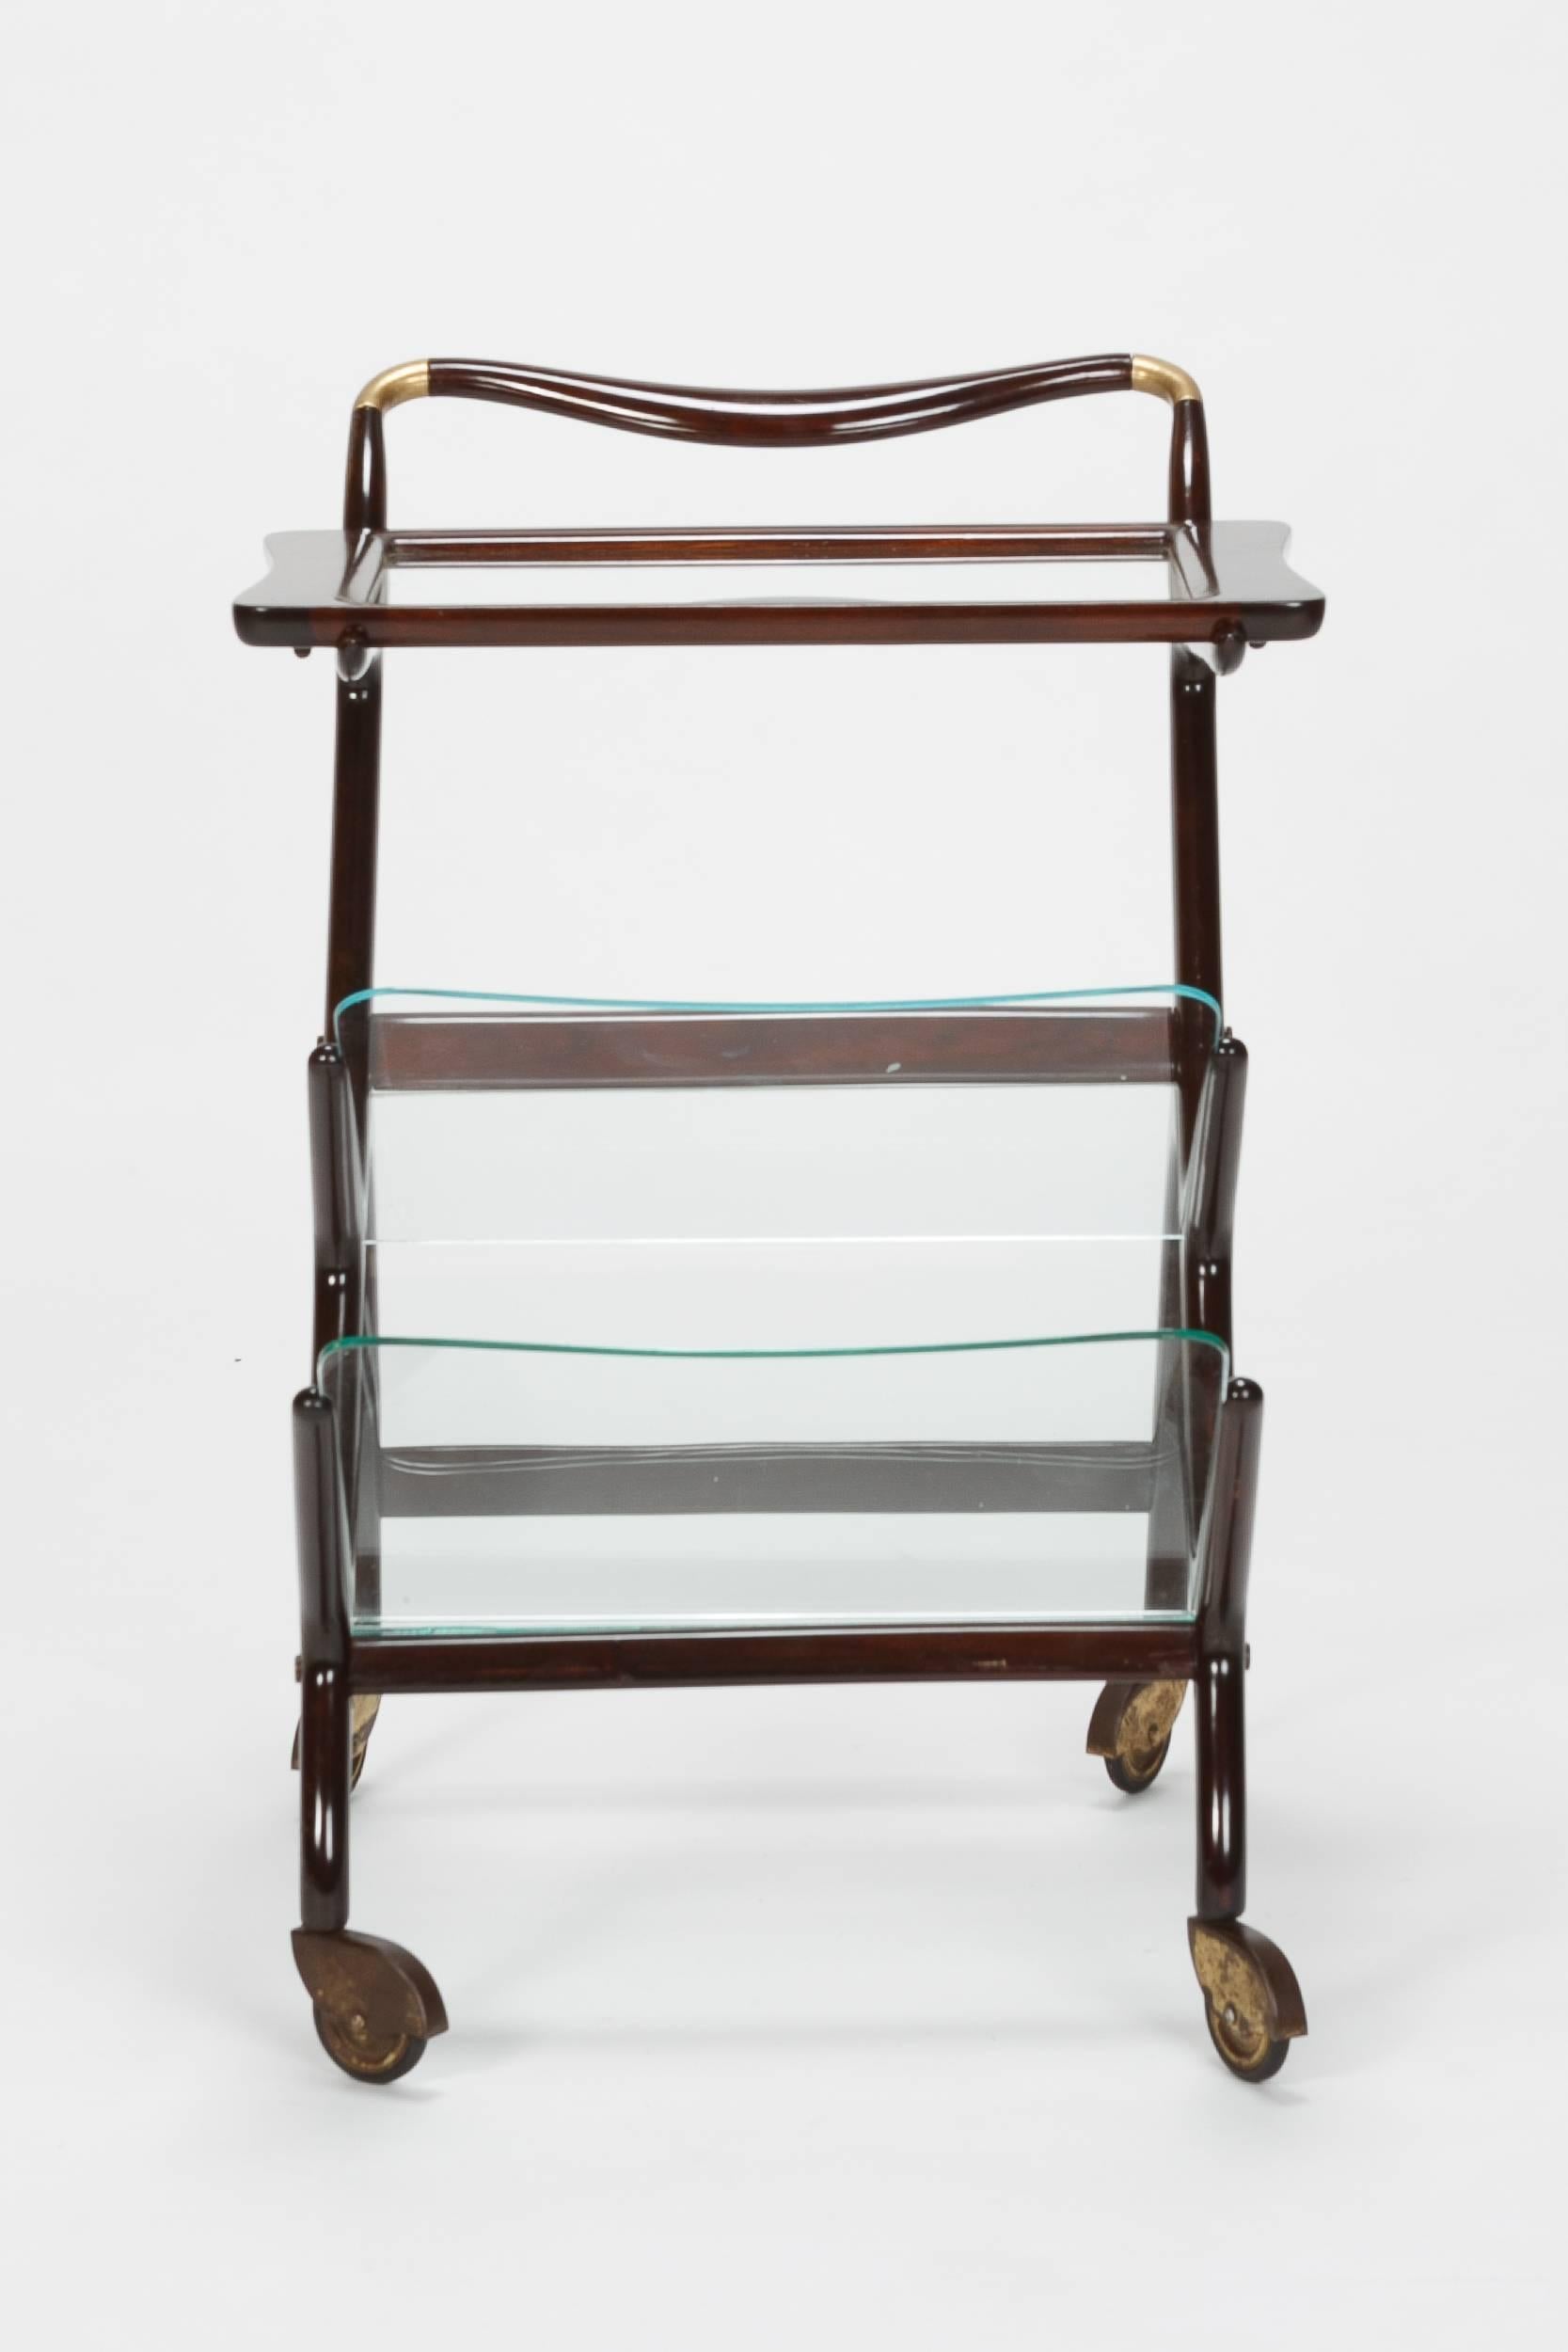 Wonderful Ico Parisi bar cart from the 1950s made of mahogany with original brass wheels. The top glass with wooden frame is removable and can be used as a tray. Two further glass shelves can be used as a newspaper rack. New lacquer.